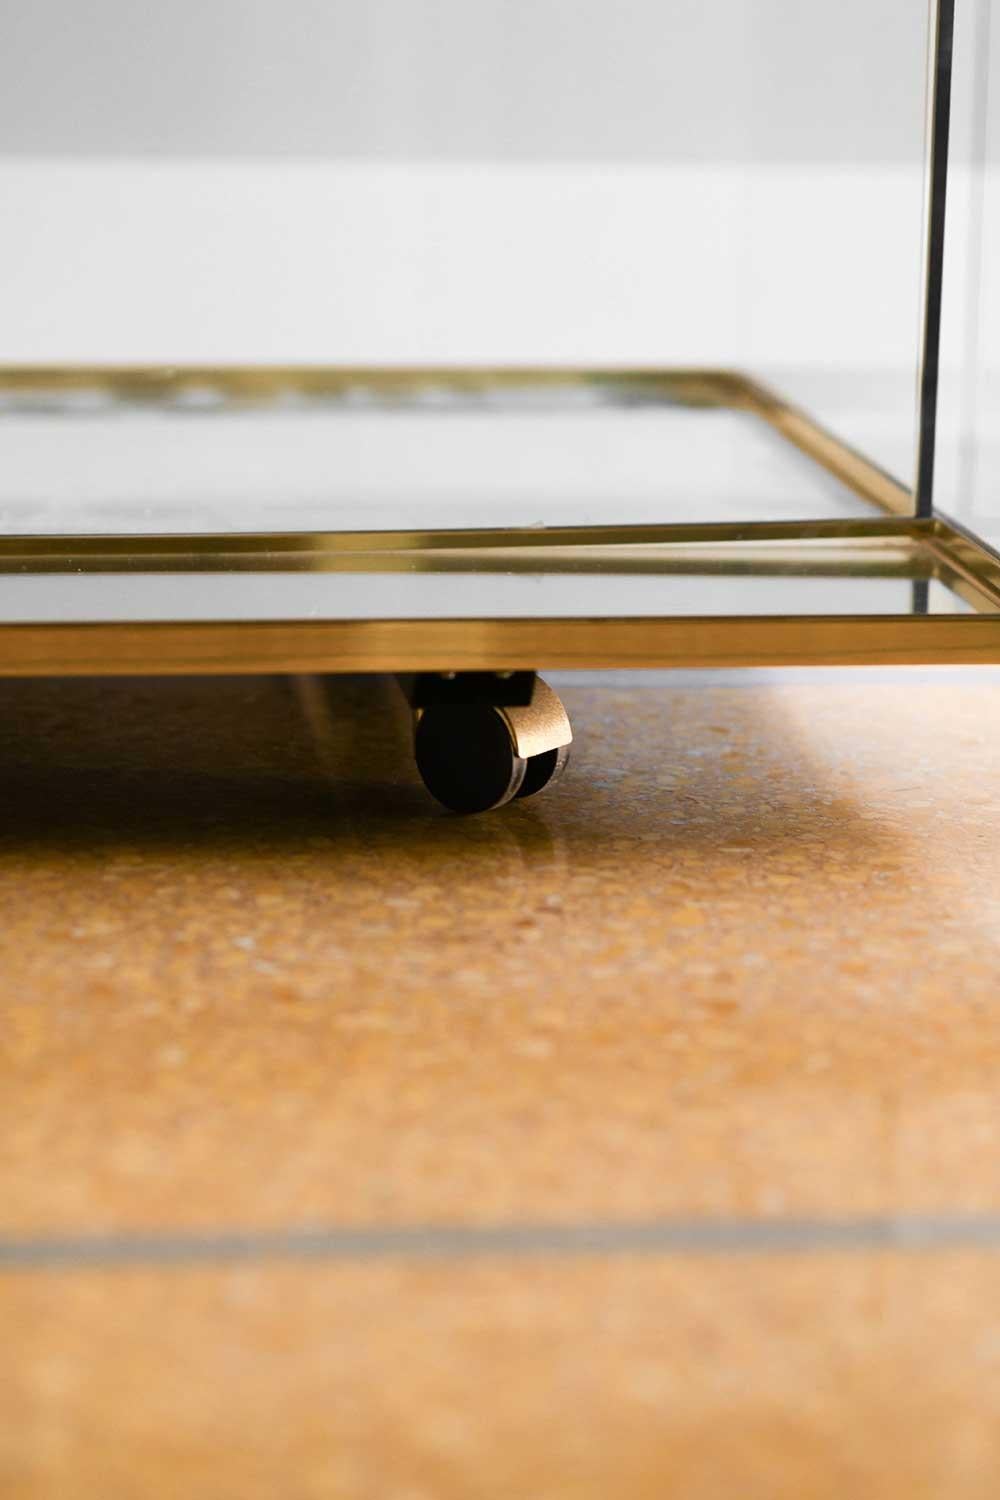 Brass, glass and mirrored glass coffee table with 4 removable trays, 1970
Product details
Dimensions: 136L x 38H x 78D cm